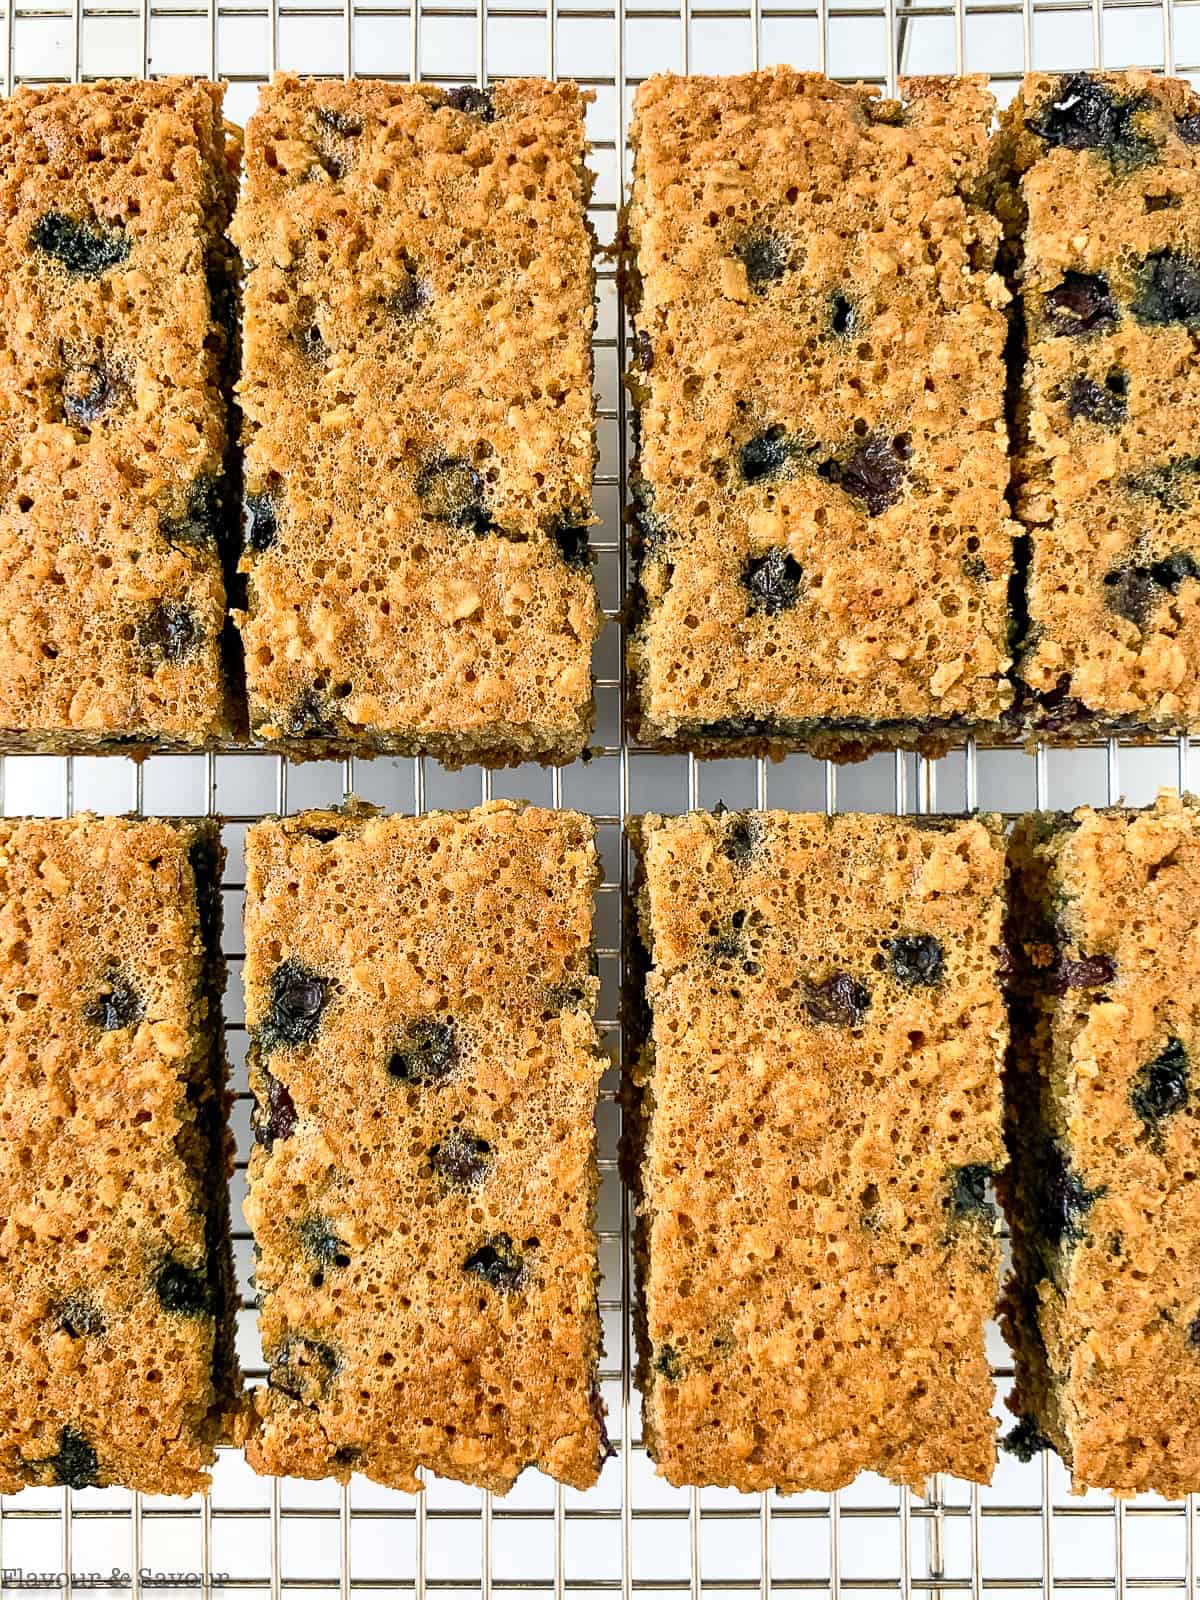 Blueberry oatmeal breakfast bars on a cooling rack.